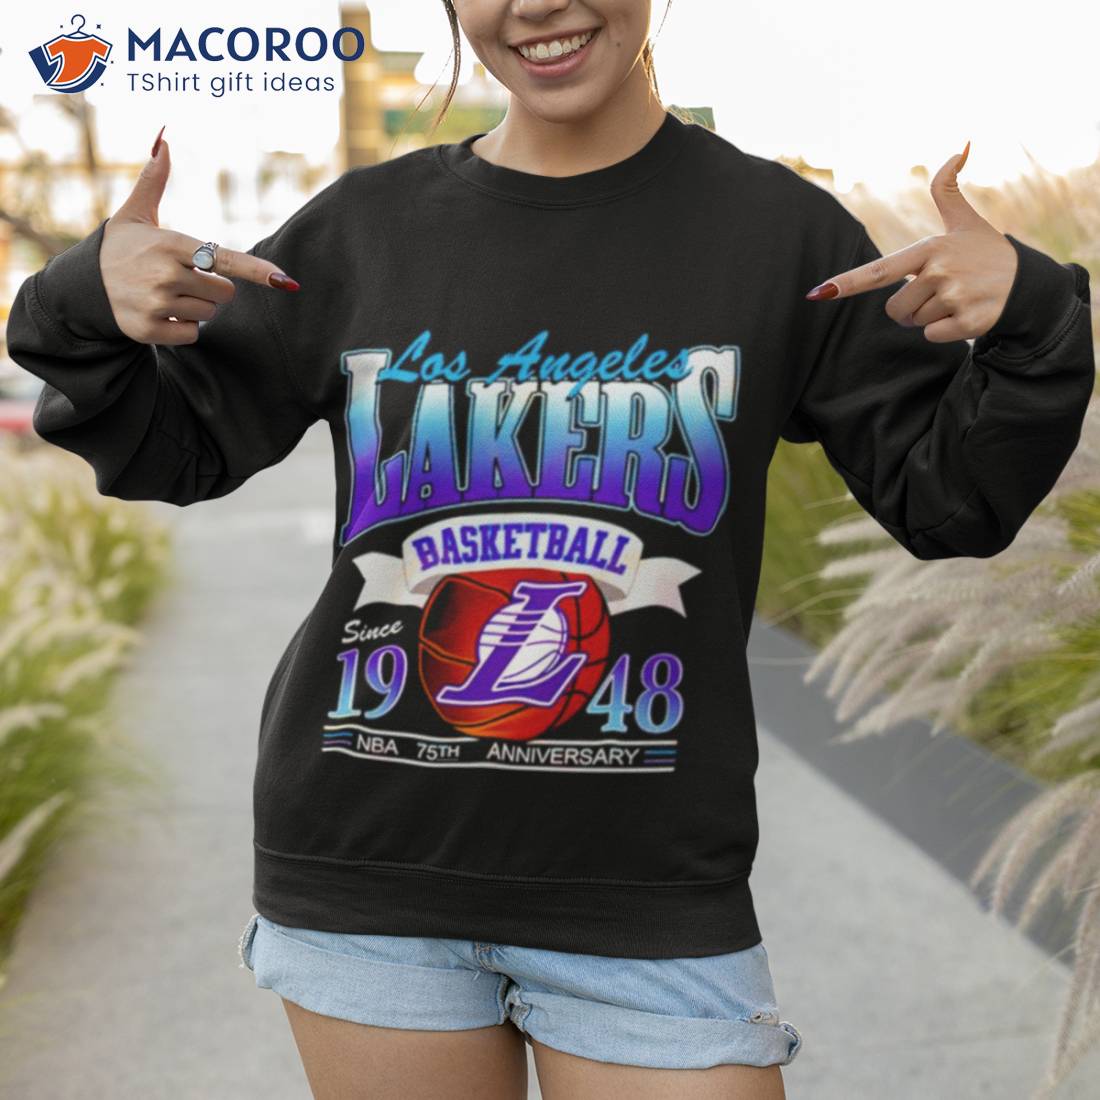 Official Los Angeles Lakers Basketball Since 1948 NBA 75th